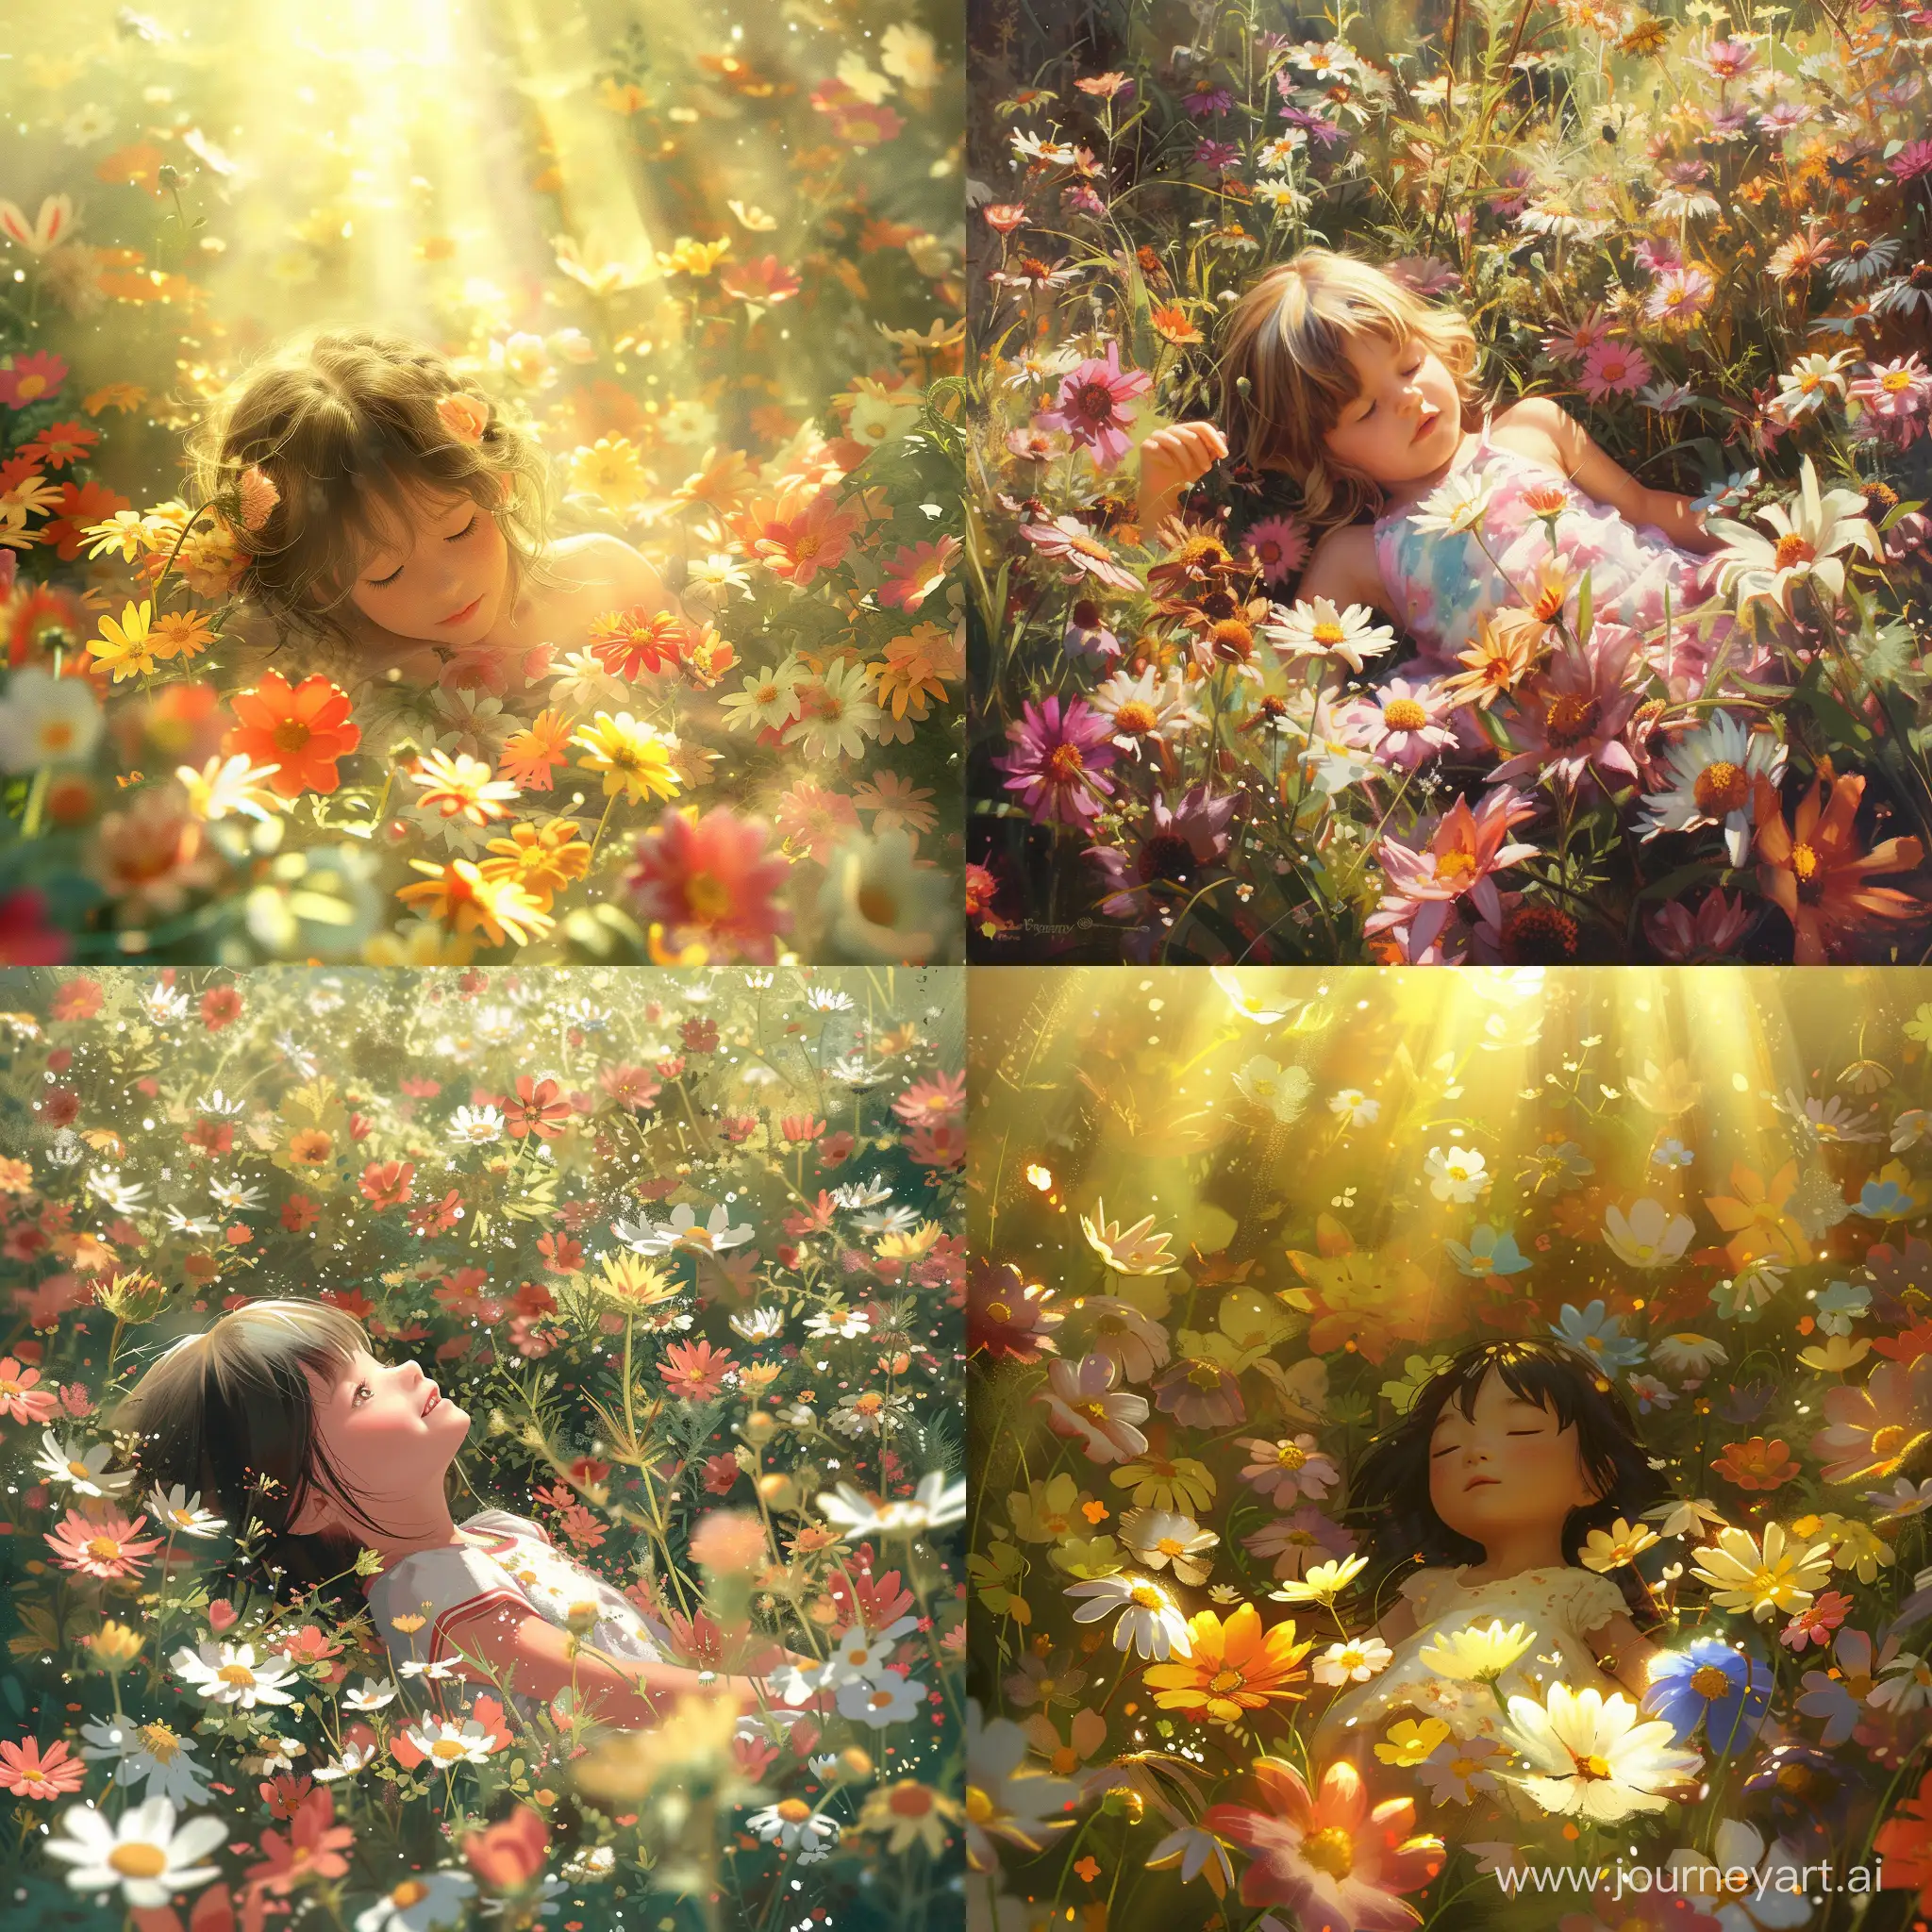 Adorable-Girl-Surrounded-by-Blooming-Flowers-Under-Sunlight